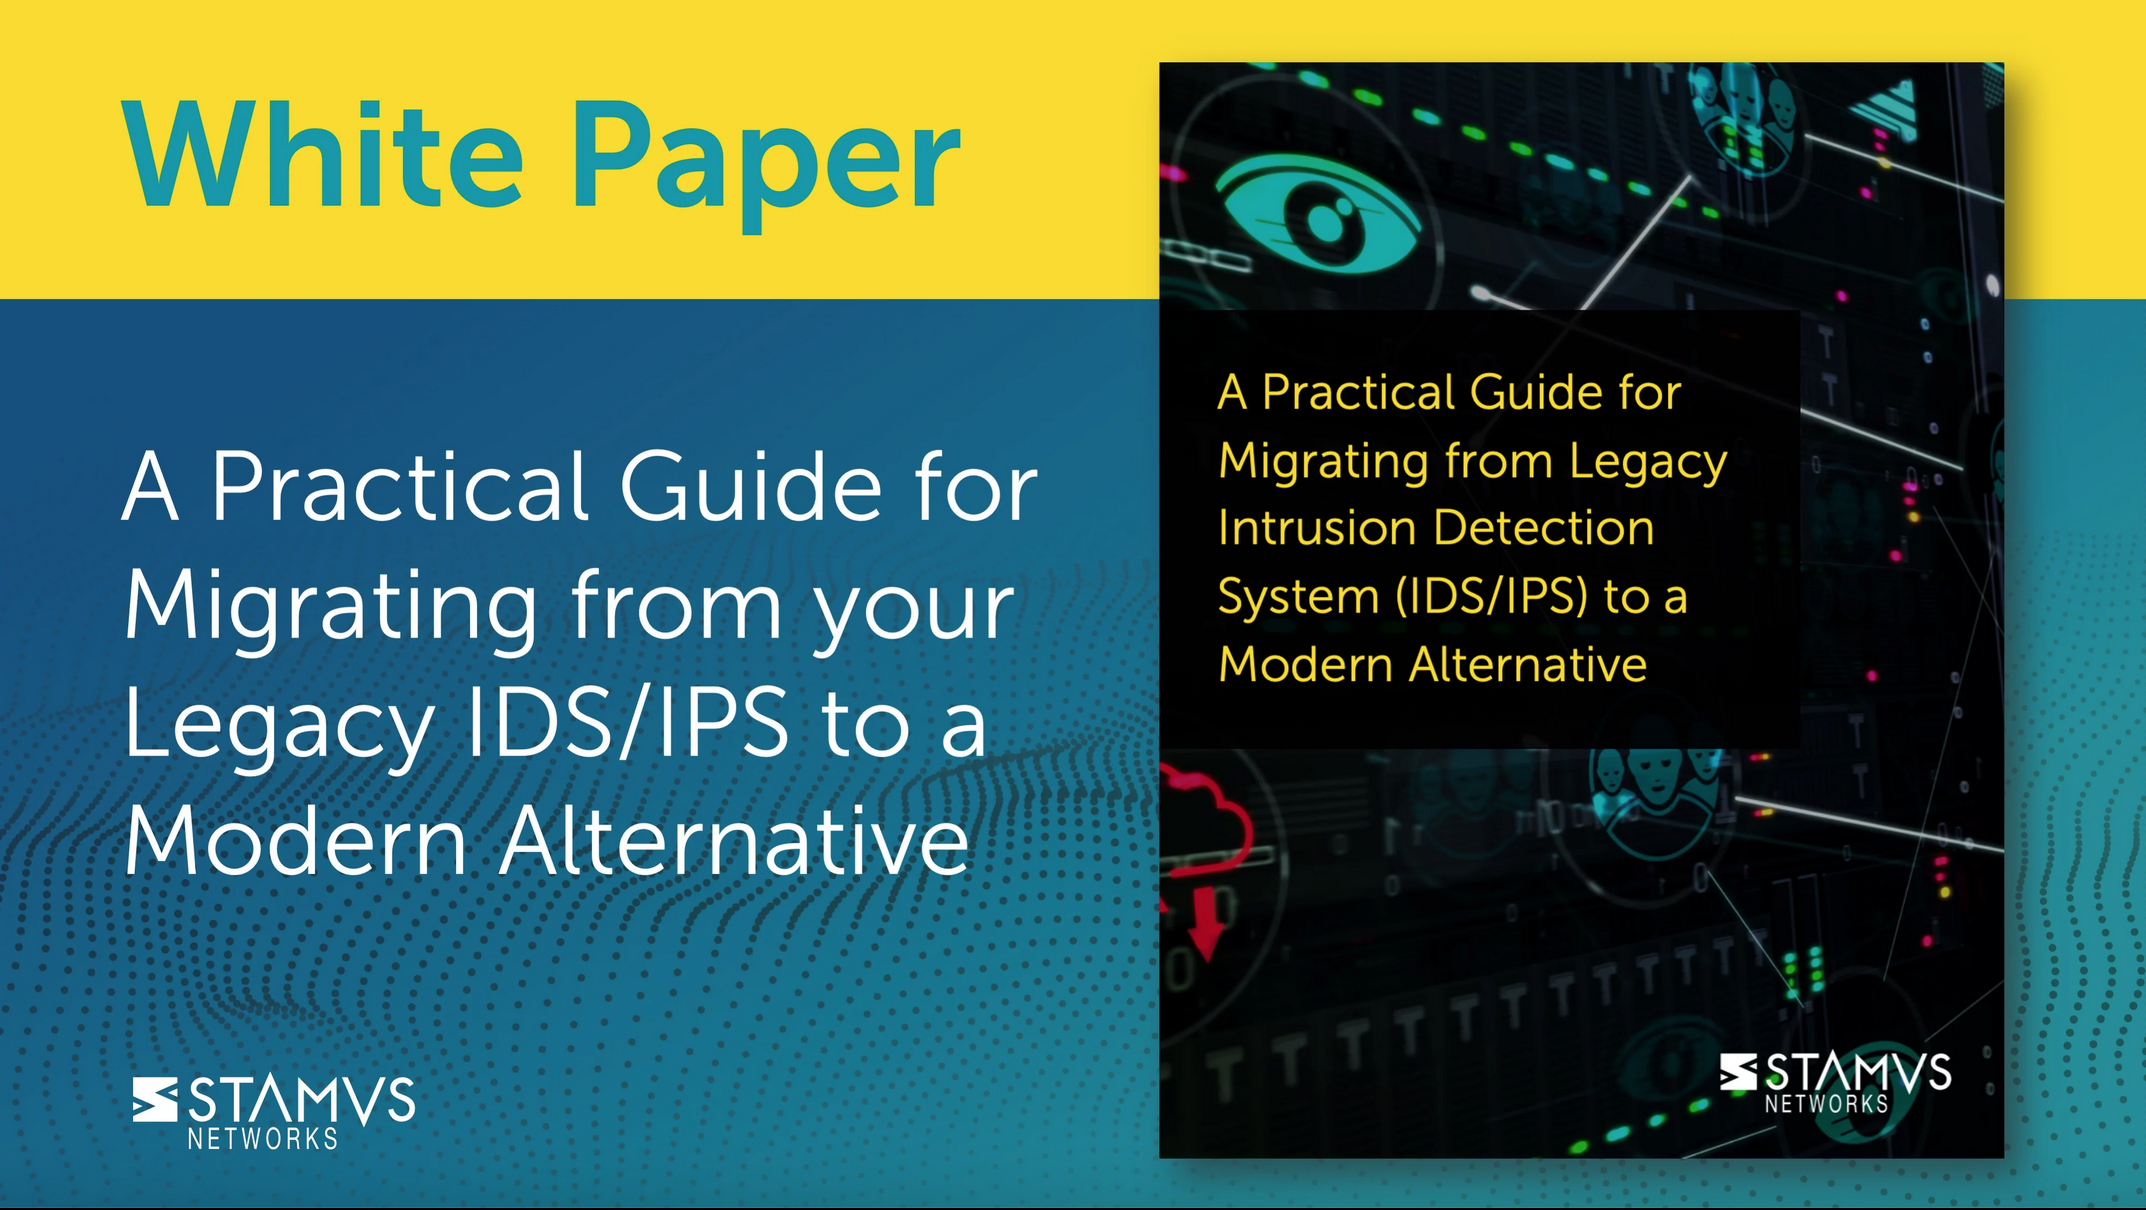 A Practical Guide for Migrating from your Legacy IDSIPS